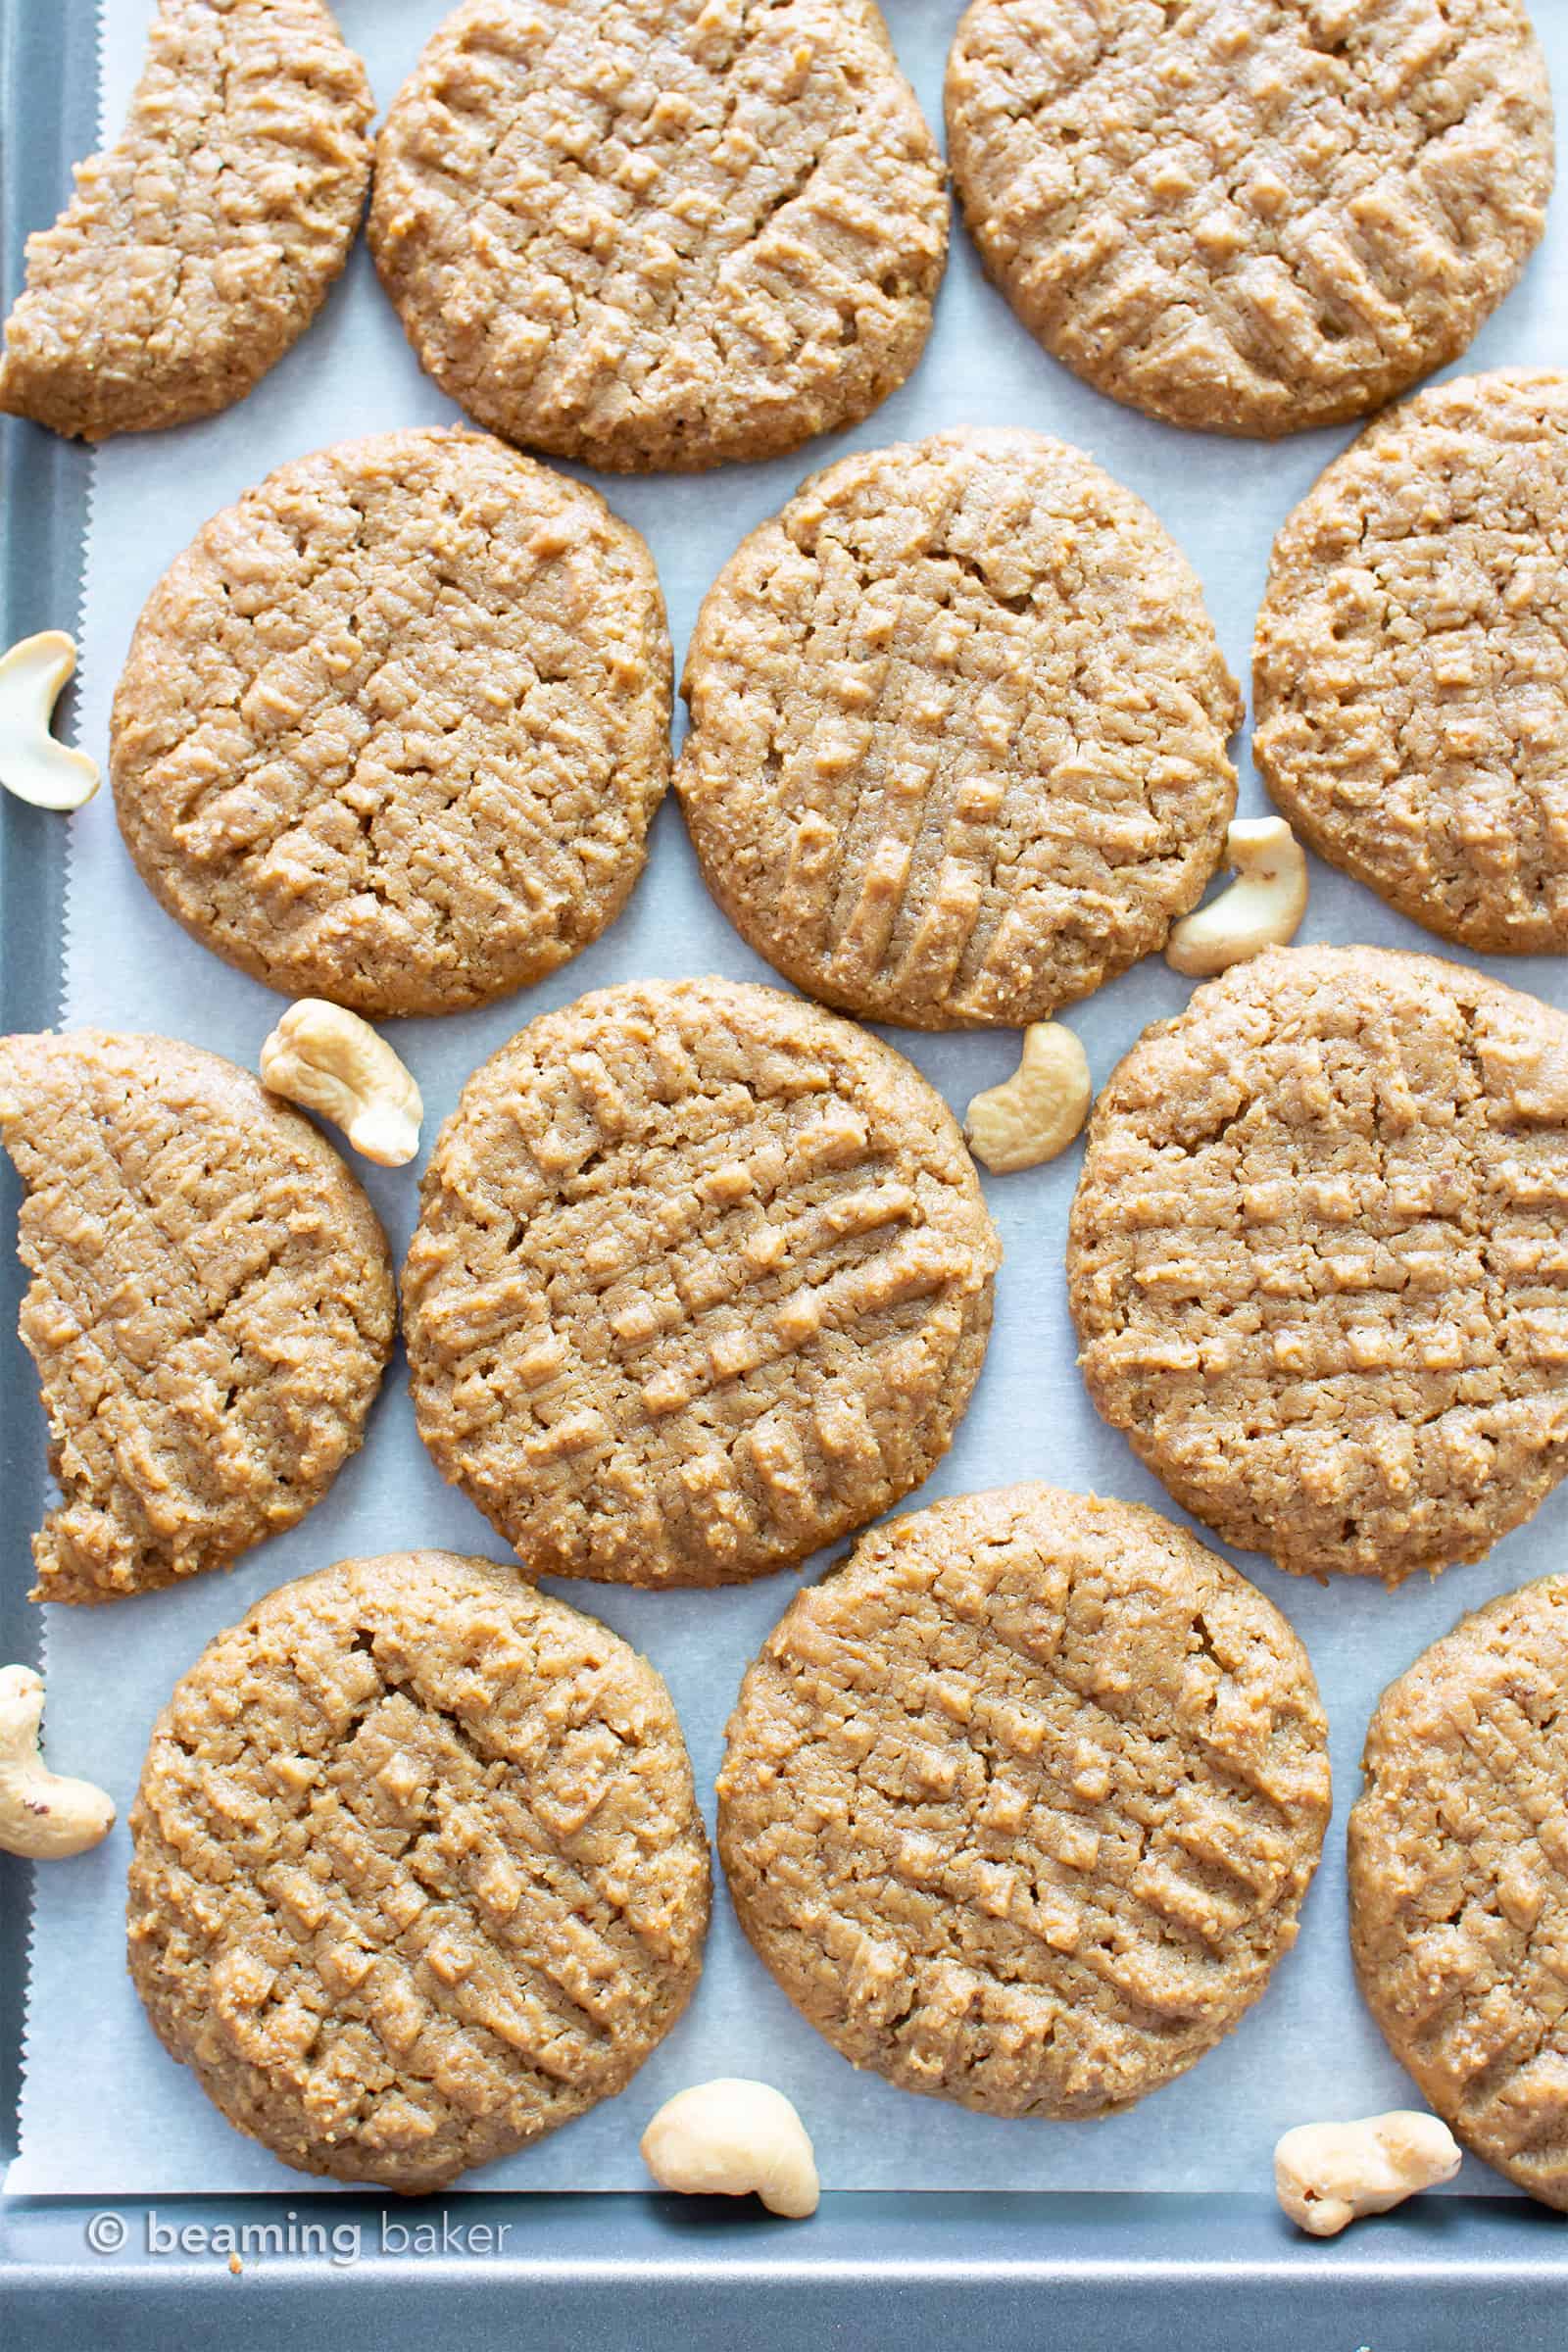 Vegan Cashew Butter Cookies Recipe: just 4 ingredients for super soft, buttery, melt-in-your-mouth Flourless & Paleo Cashew Butter Cookies! Quick & easy, made from healthy ingredients, GF. #CashewButter #Cookies #Paleo #Vegan #Flourless | Recipe at BeamingBaker.com